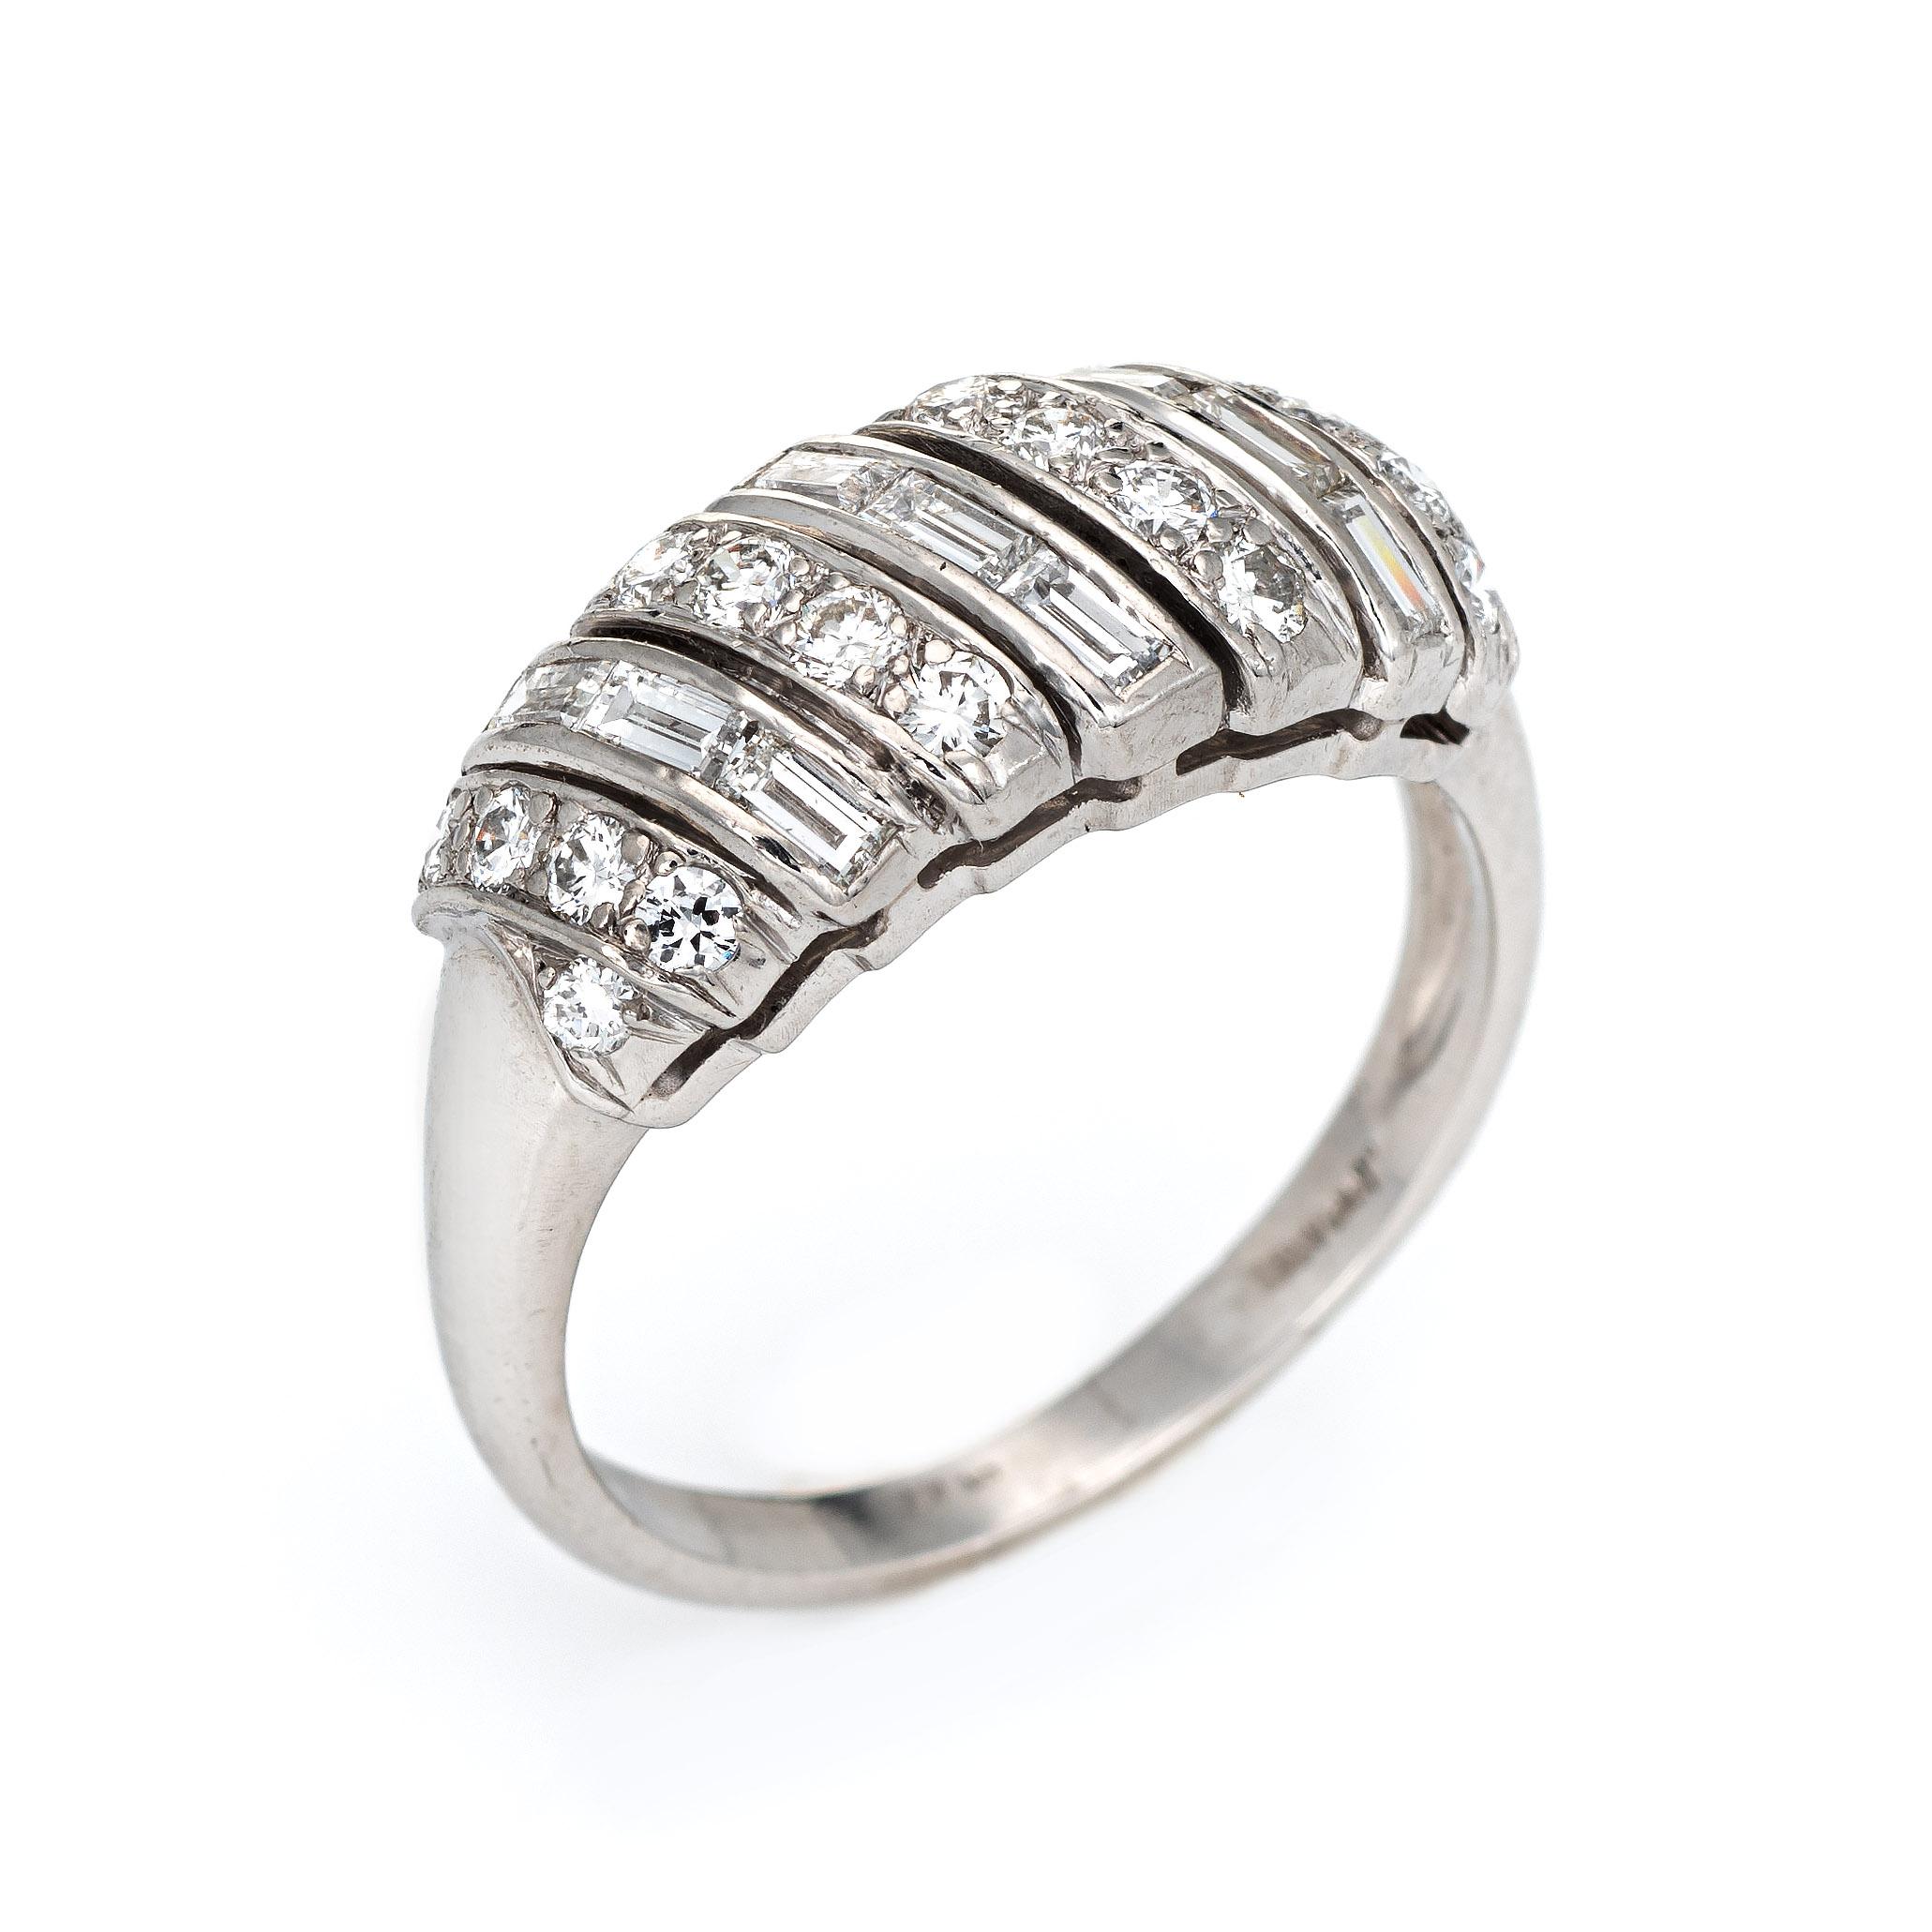 Stylish mixed cut diamond ring (circa 1950s to 1960s) crafted in 900 platinum. 

Straight baguette & round brilliant cut diamonds total an estimated 0.90 carats (estimated at H-I color and VS2-SI1 clarity). 

The elegant mid century band is set with